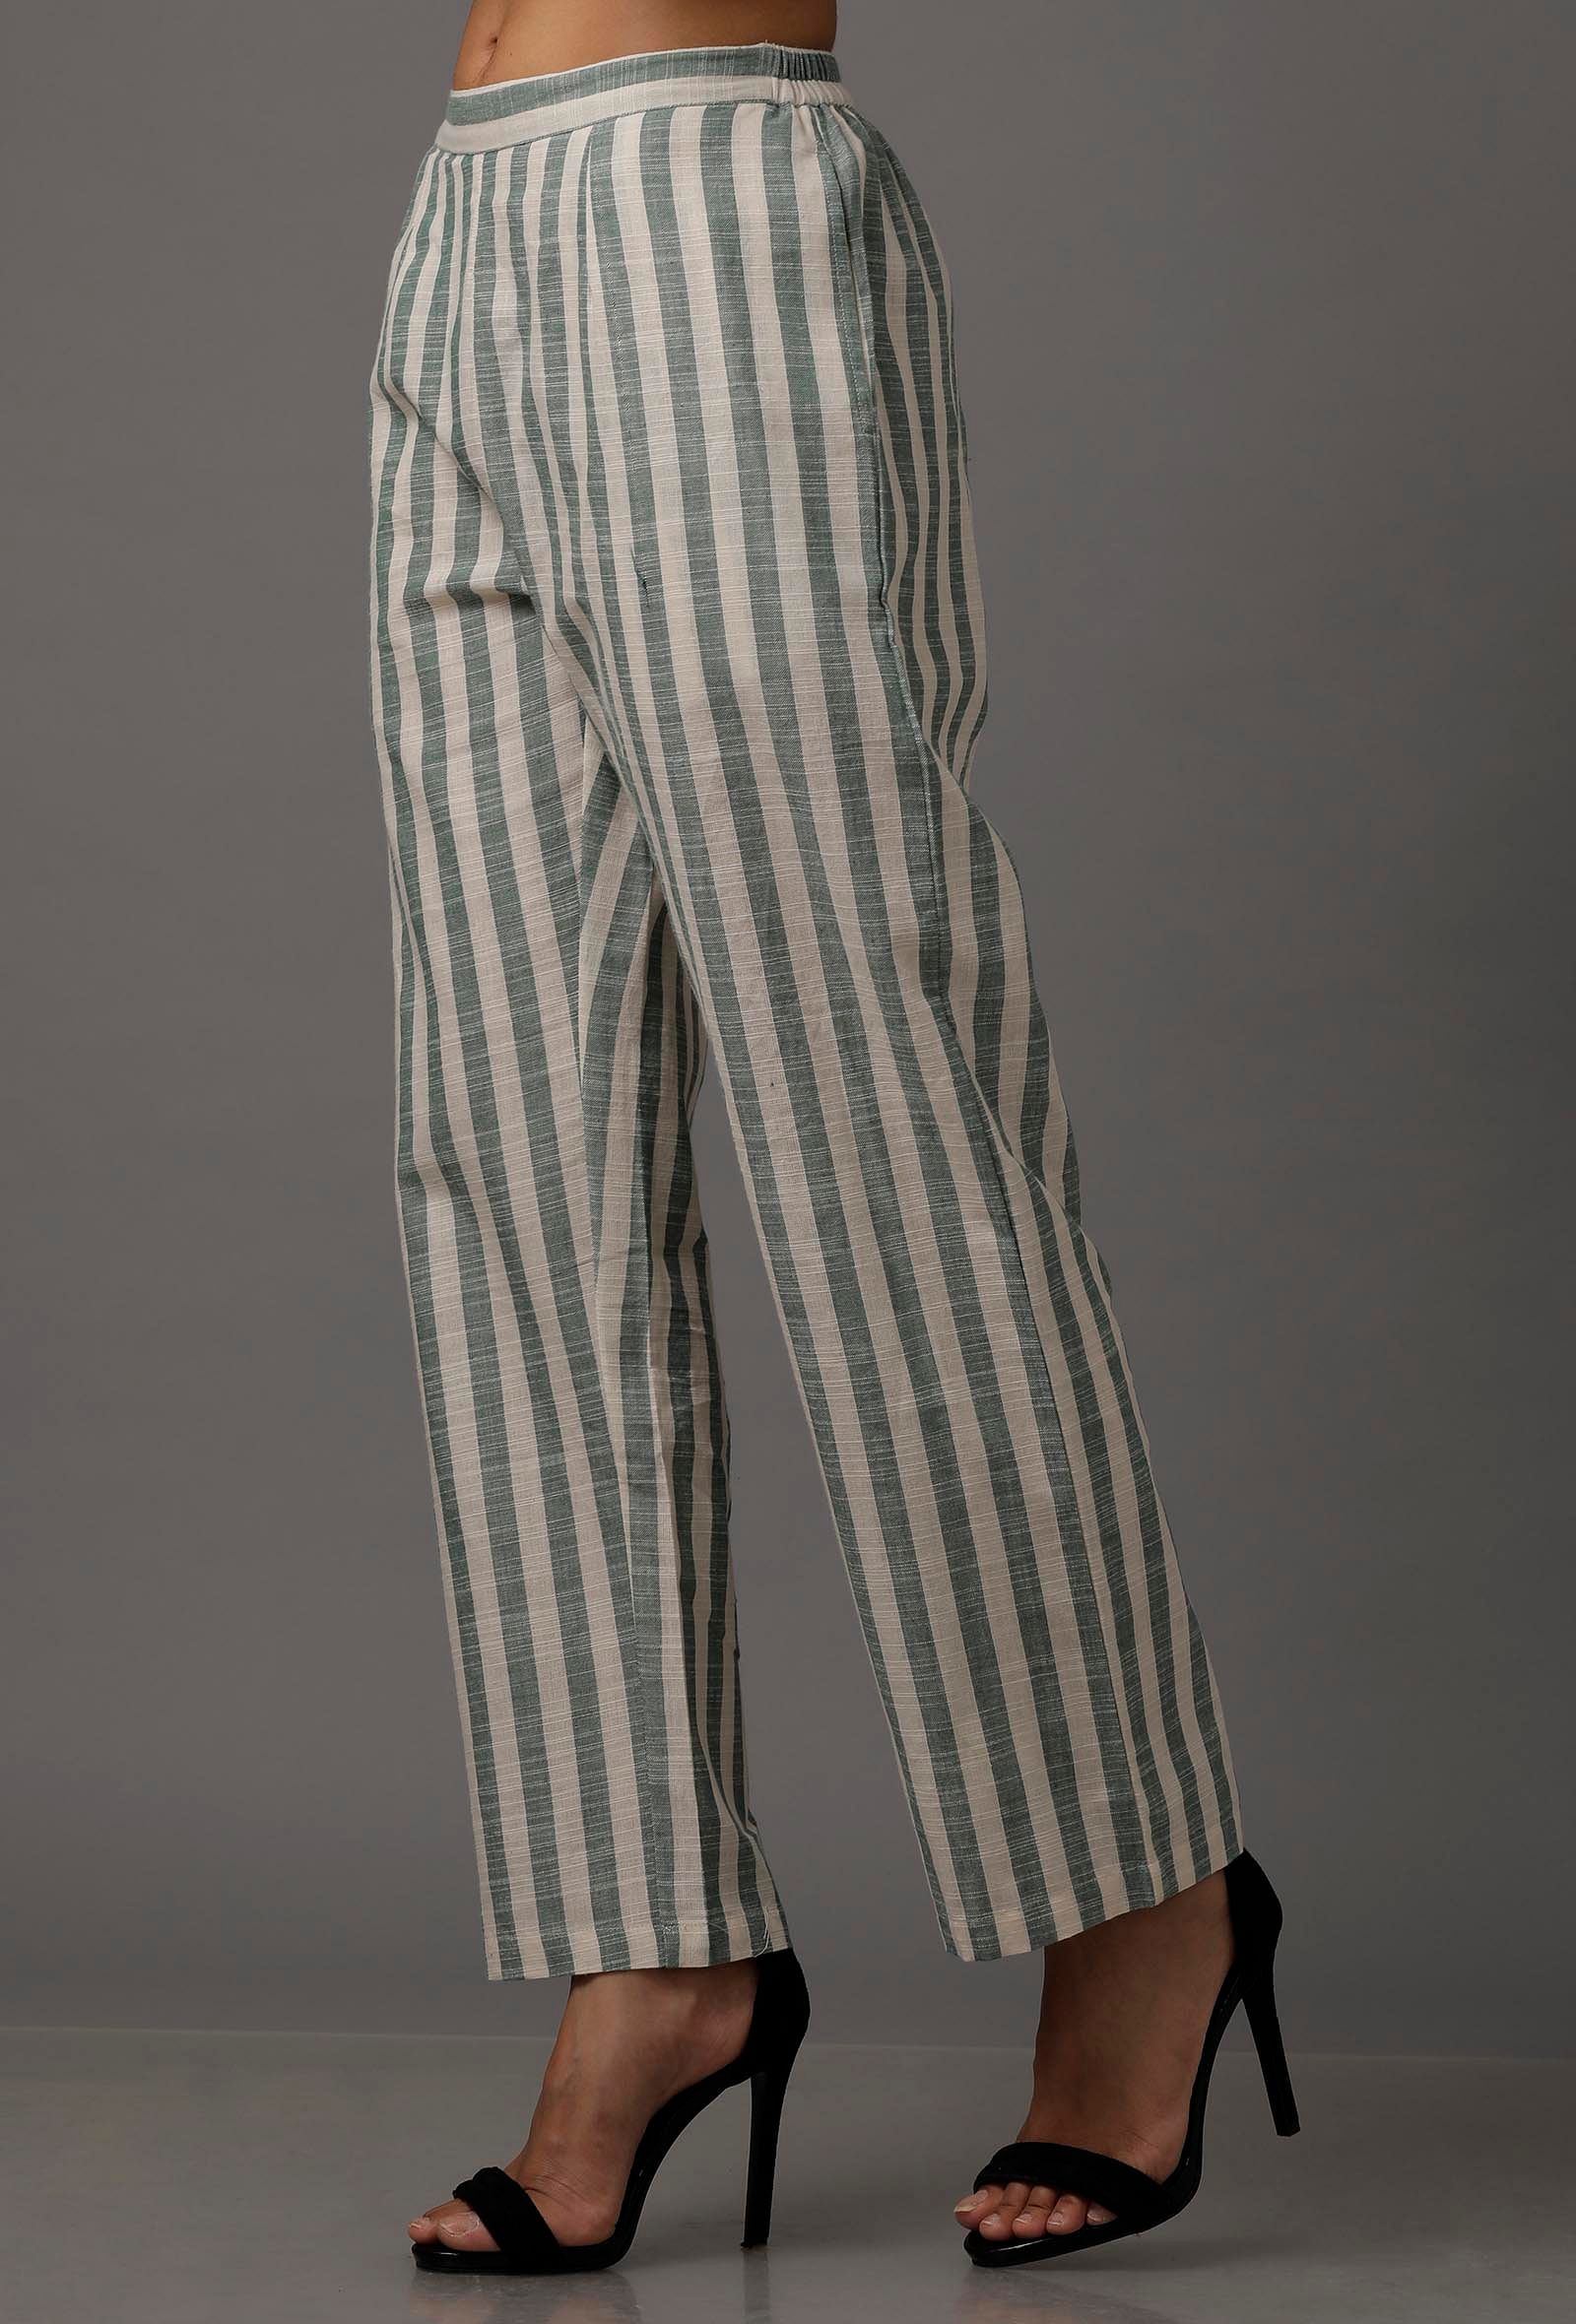 Buy Blue White Striped Pant Cotton Khadi for Best Price Reviews Free  Shipping